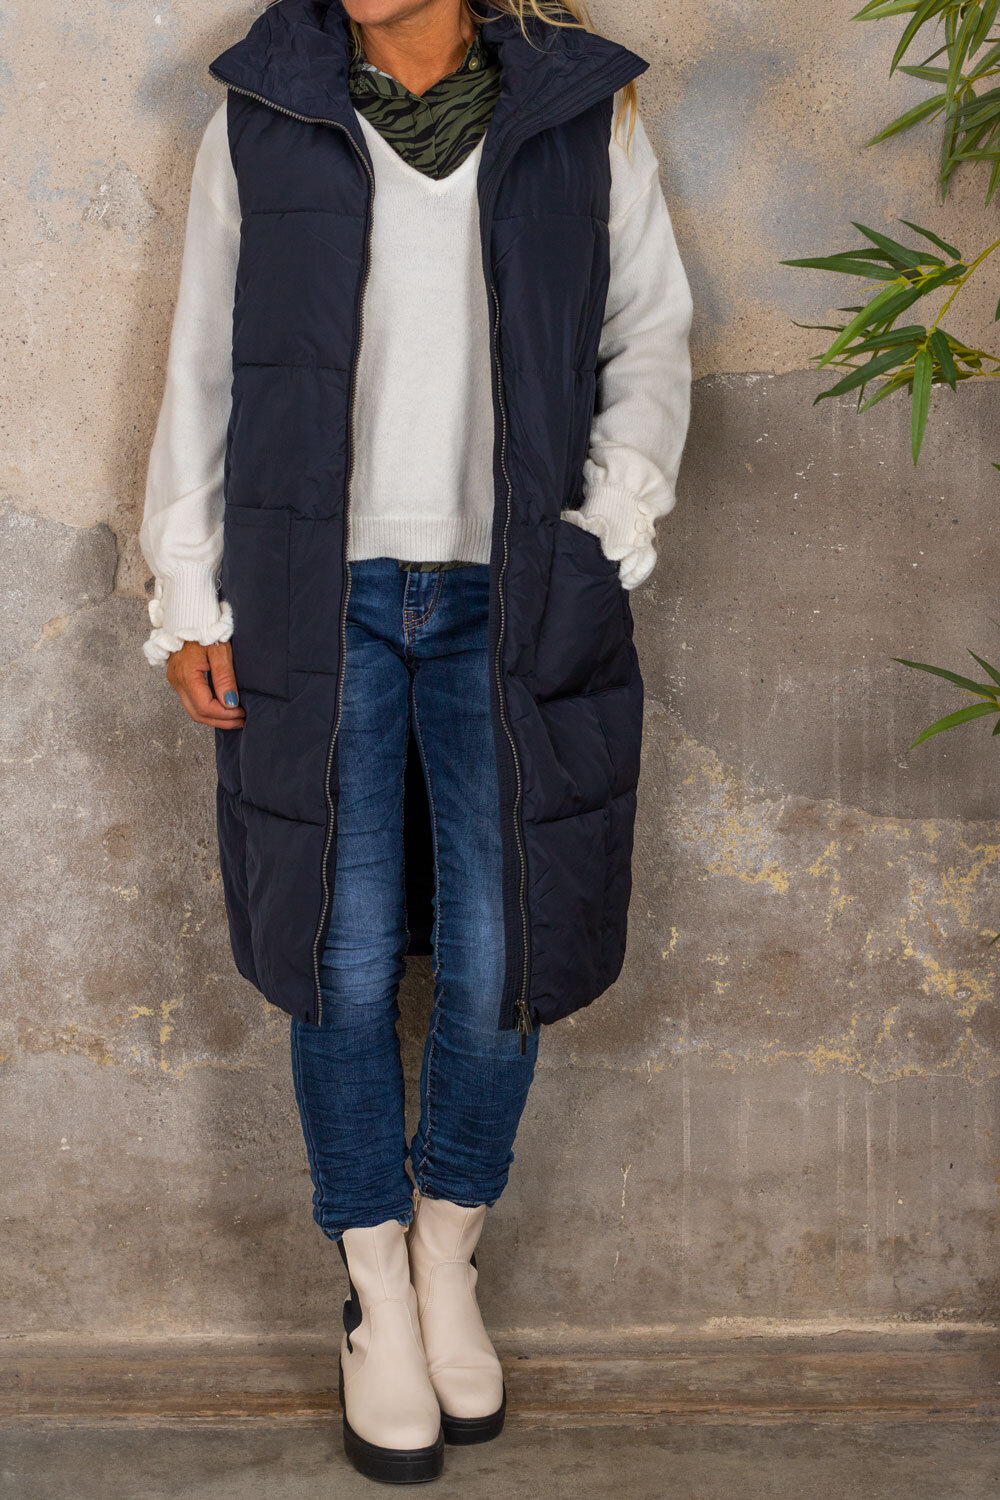 Trixie Long Cover Vest - Pockets - Navy